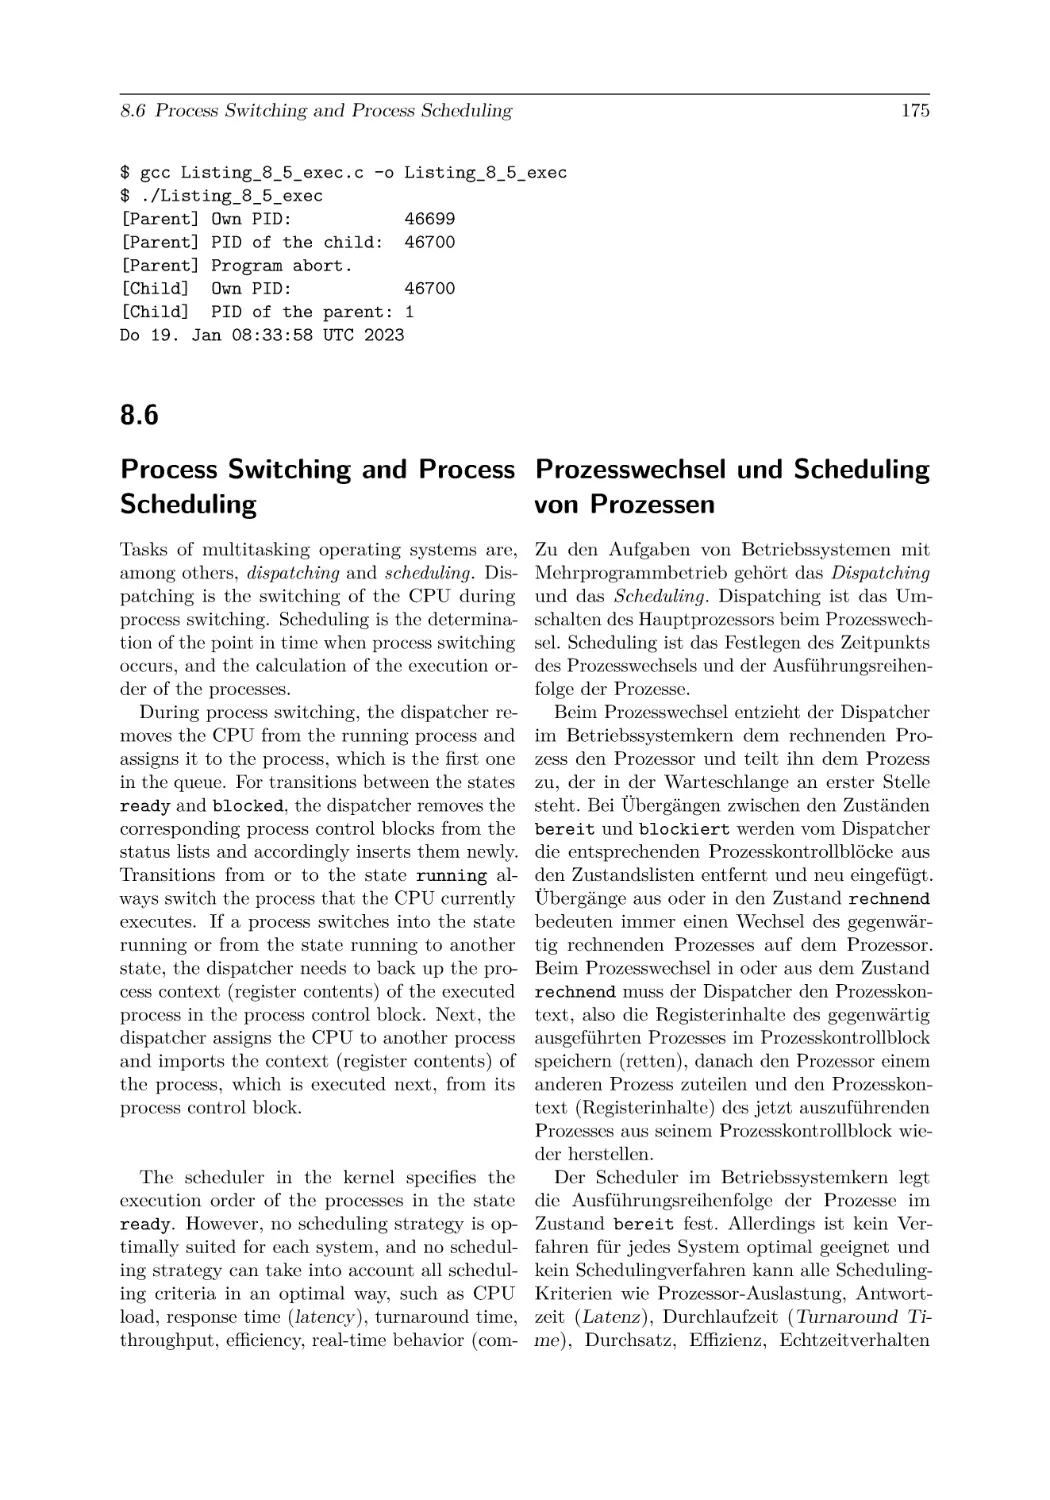 8.6
Process Switching and Process Scheduling